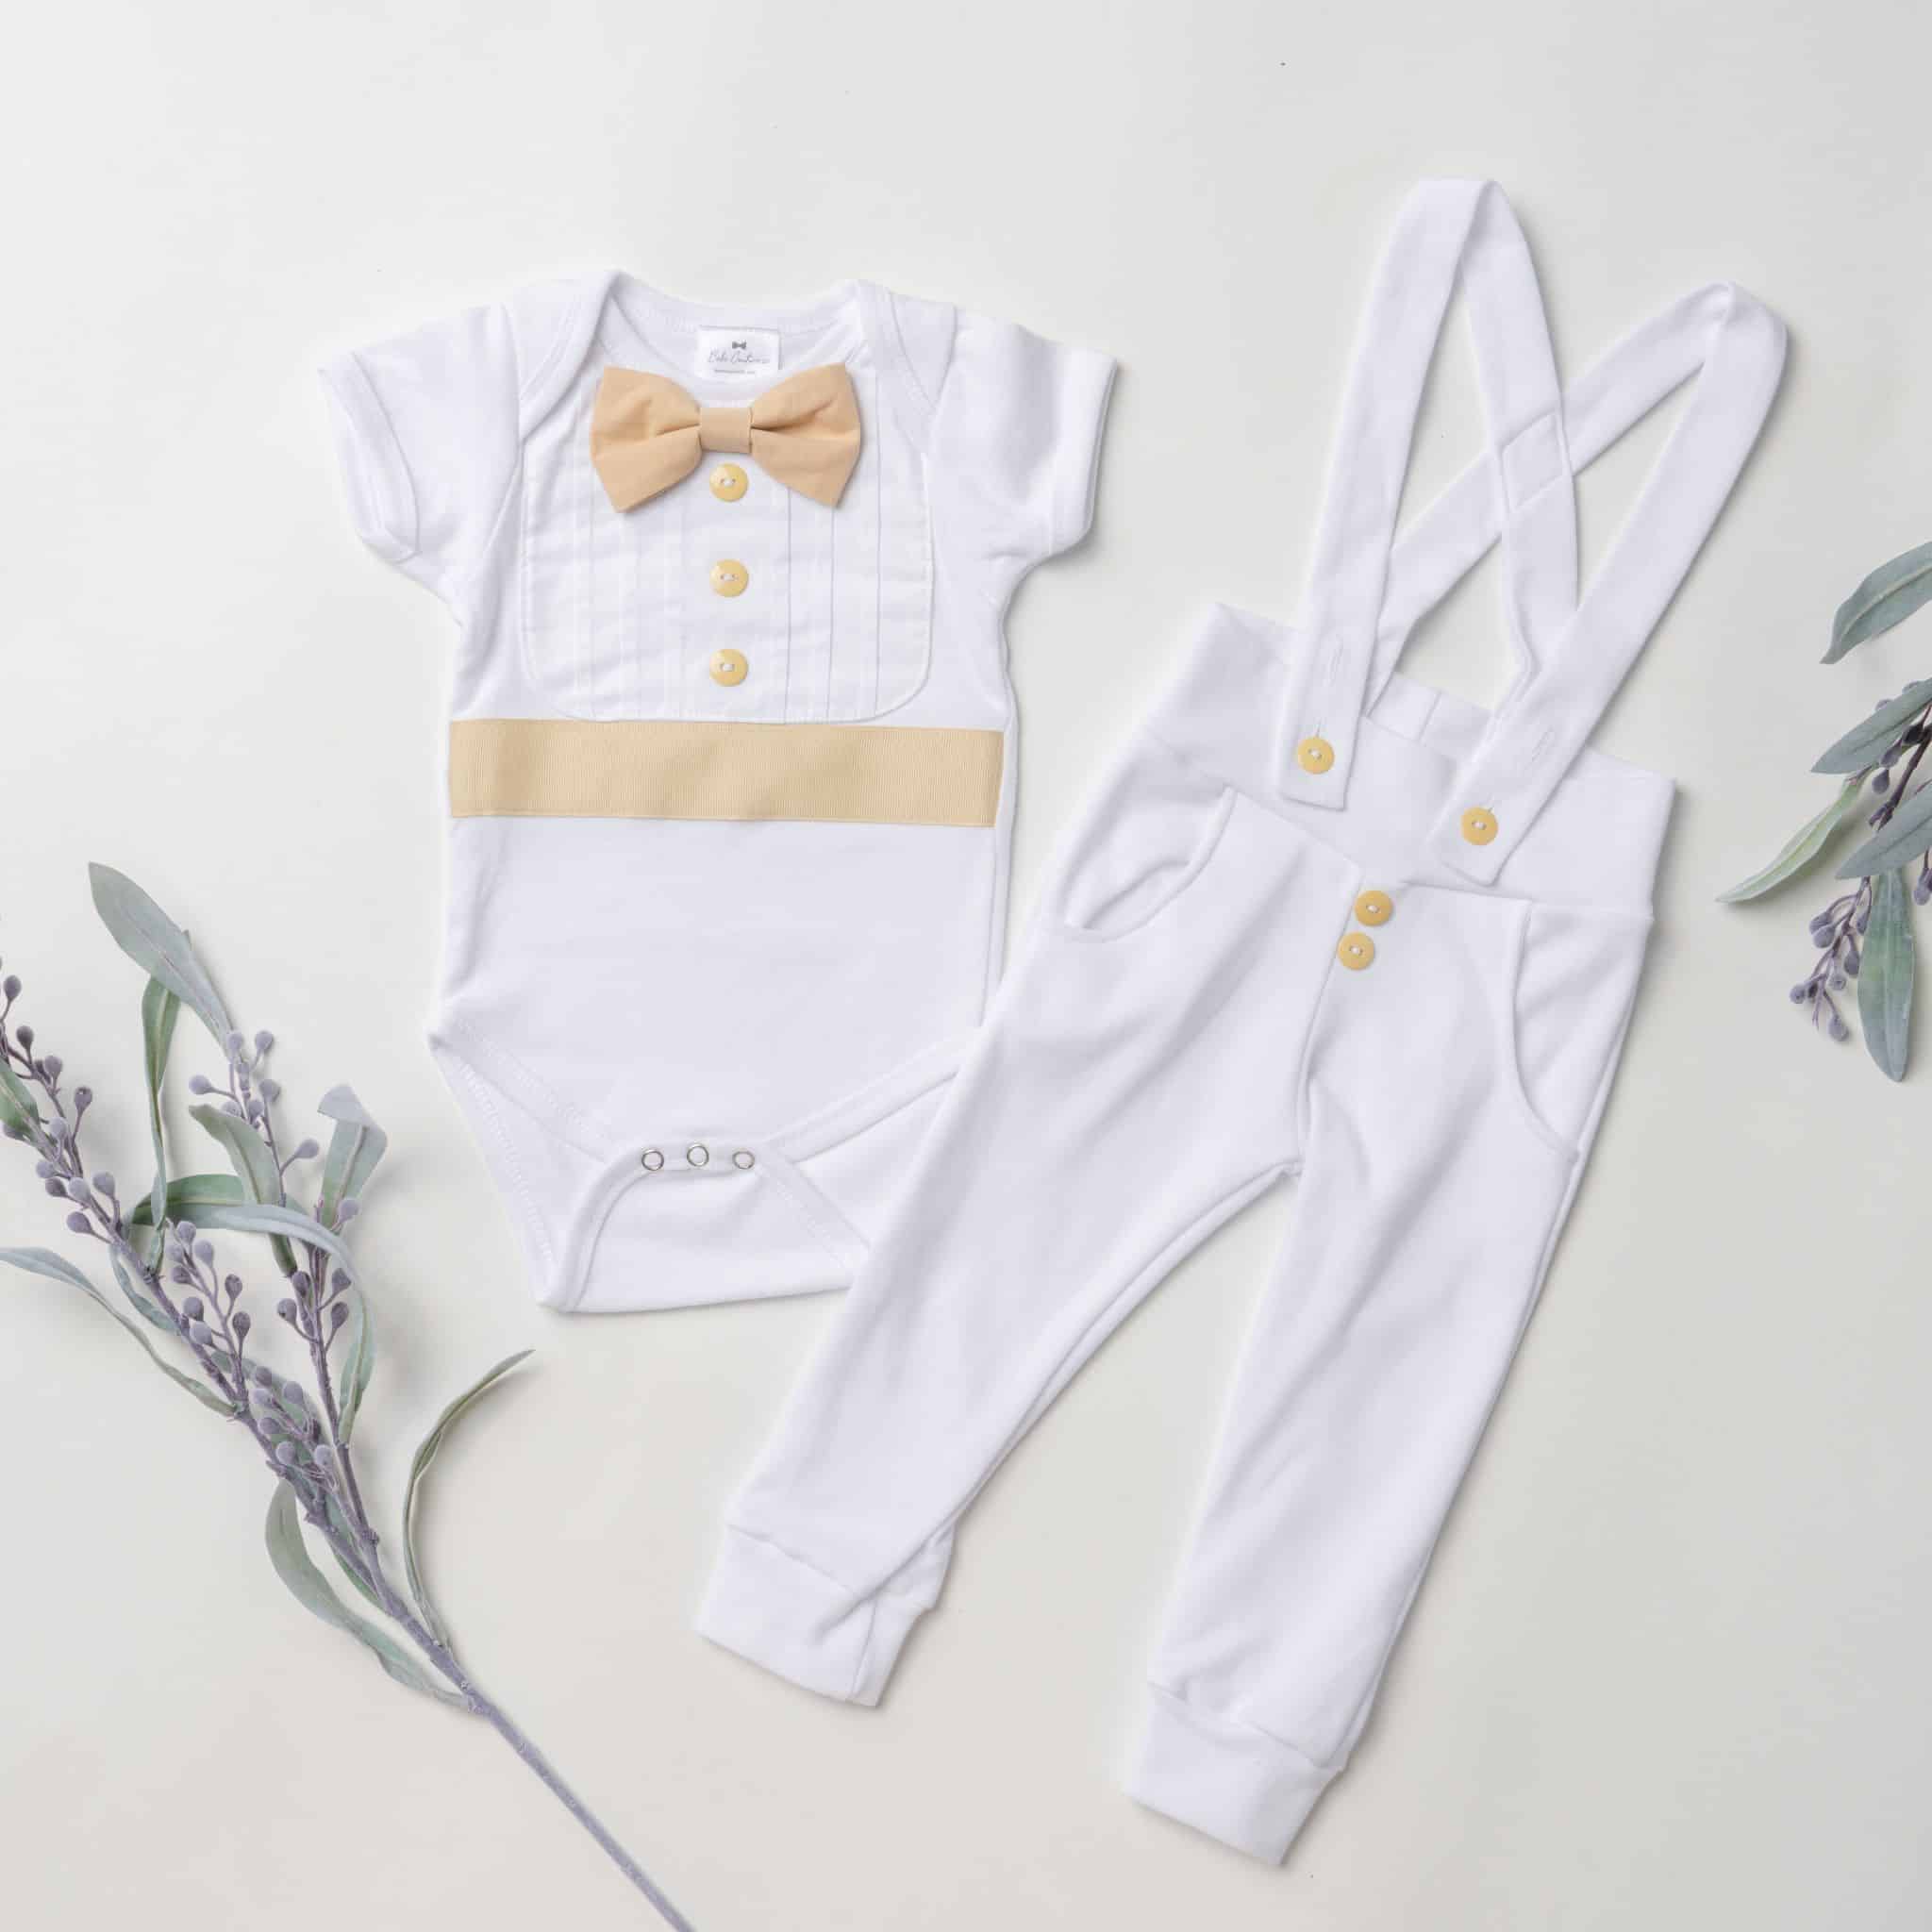 White Christening Outfit w/ Tan Accents | Bebe Couture